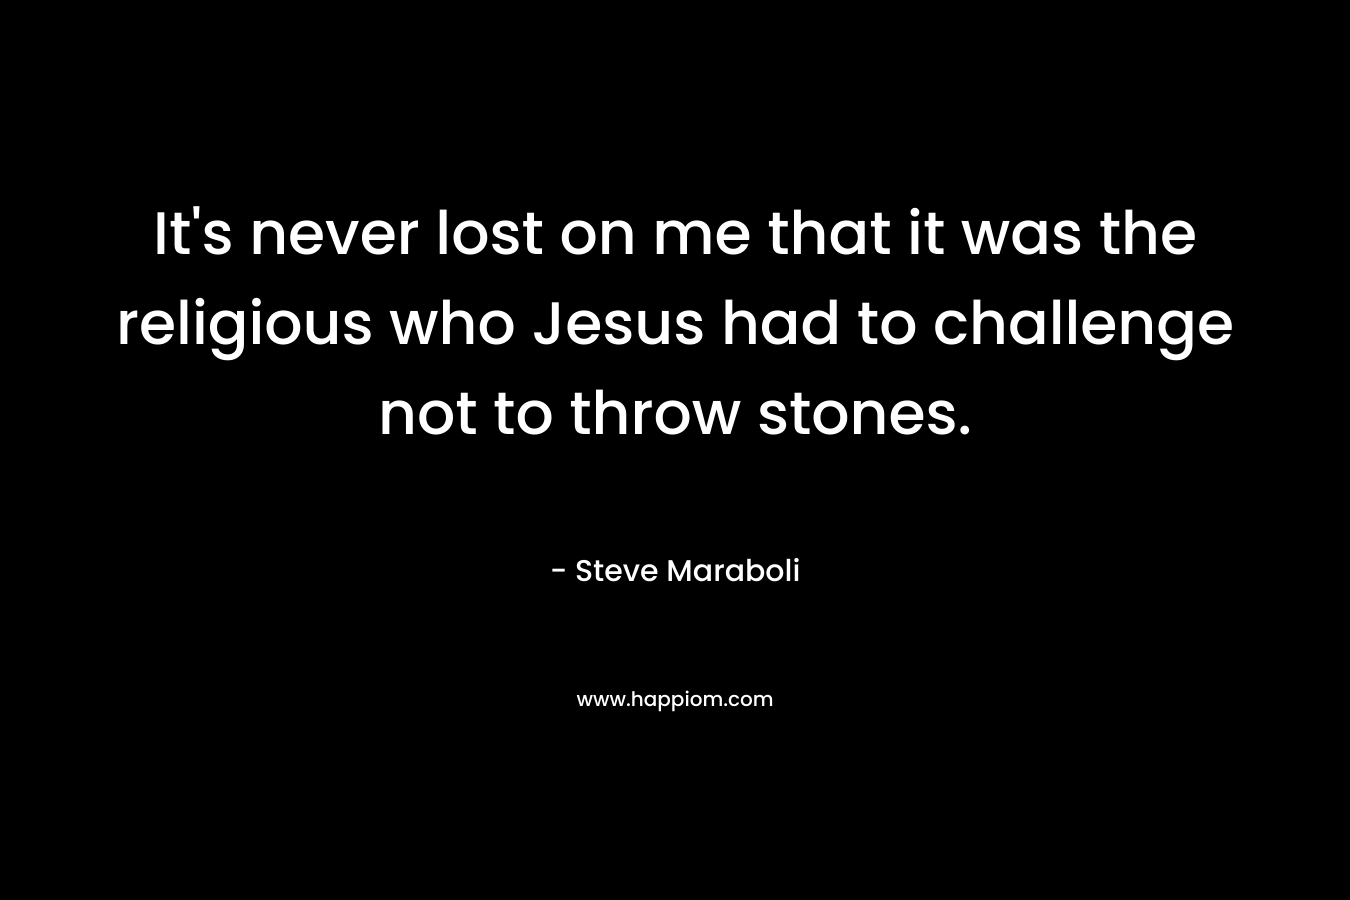 It’s never lost on me that it was the religious who Jesus had to challenge not to throw stones. – Steve Maraboli